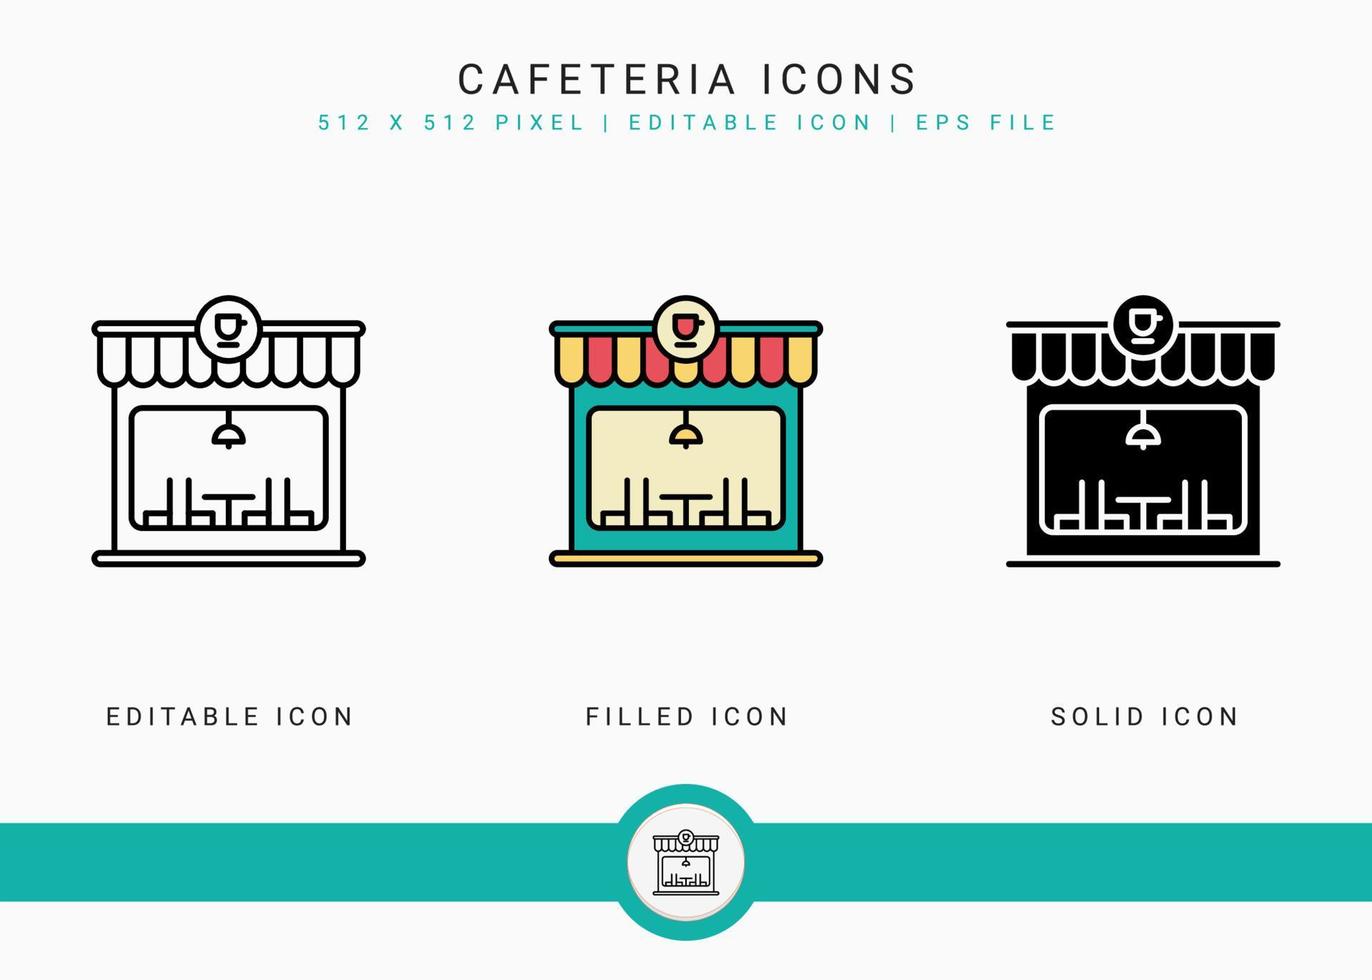 Cafeteria icons set vector illustration with solid icon line style. Modern cafe building concept. Editable stroke icon on isolated background for web design, infographic and UI mobile app.